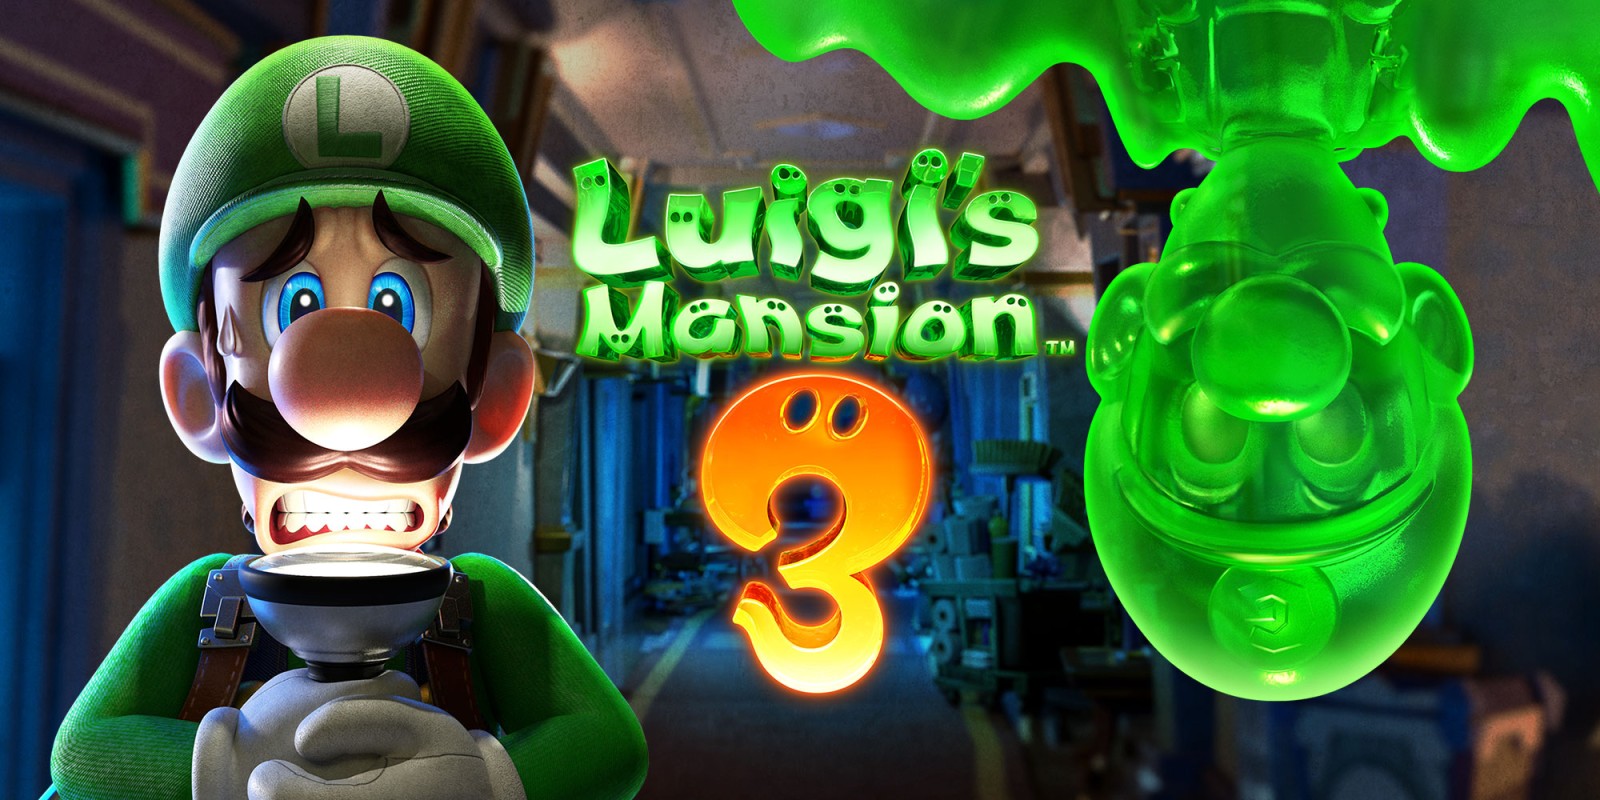 Luigi’s Mansion Has A New Floor Of The Haunted Hotel Revealed At Gamescom Along With Co-Op Play And Many Other Exciting Details